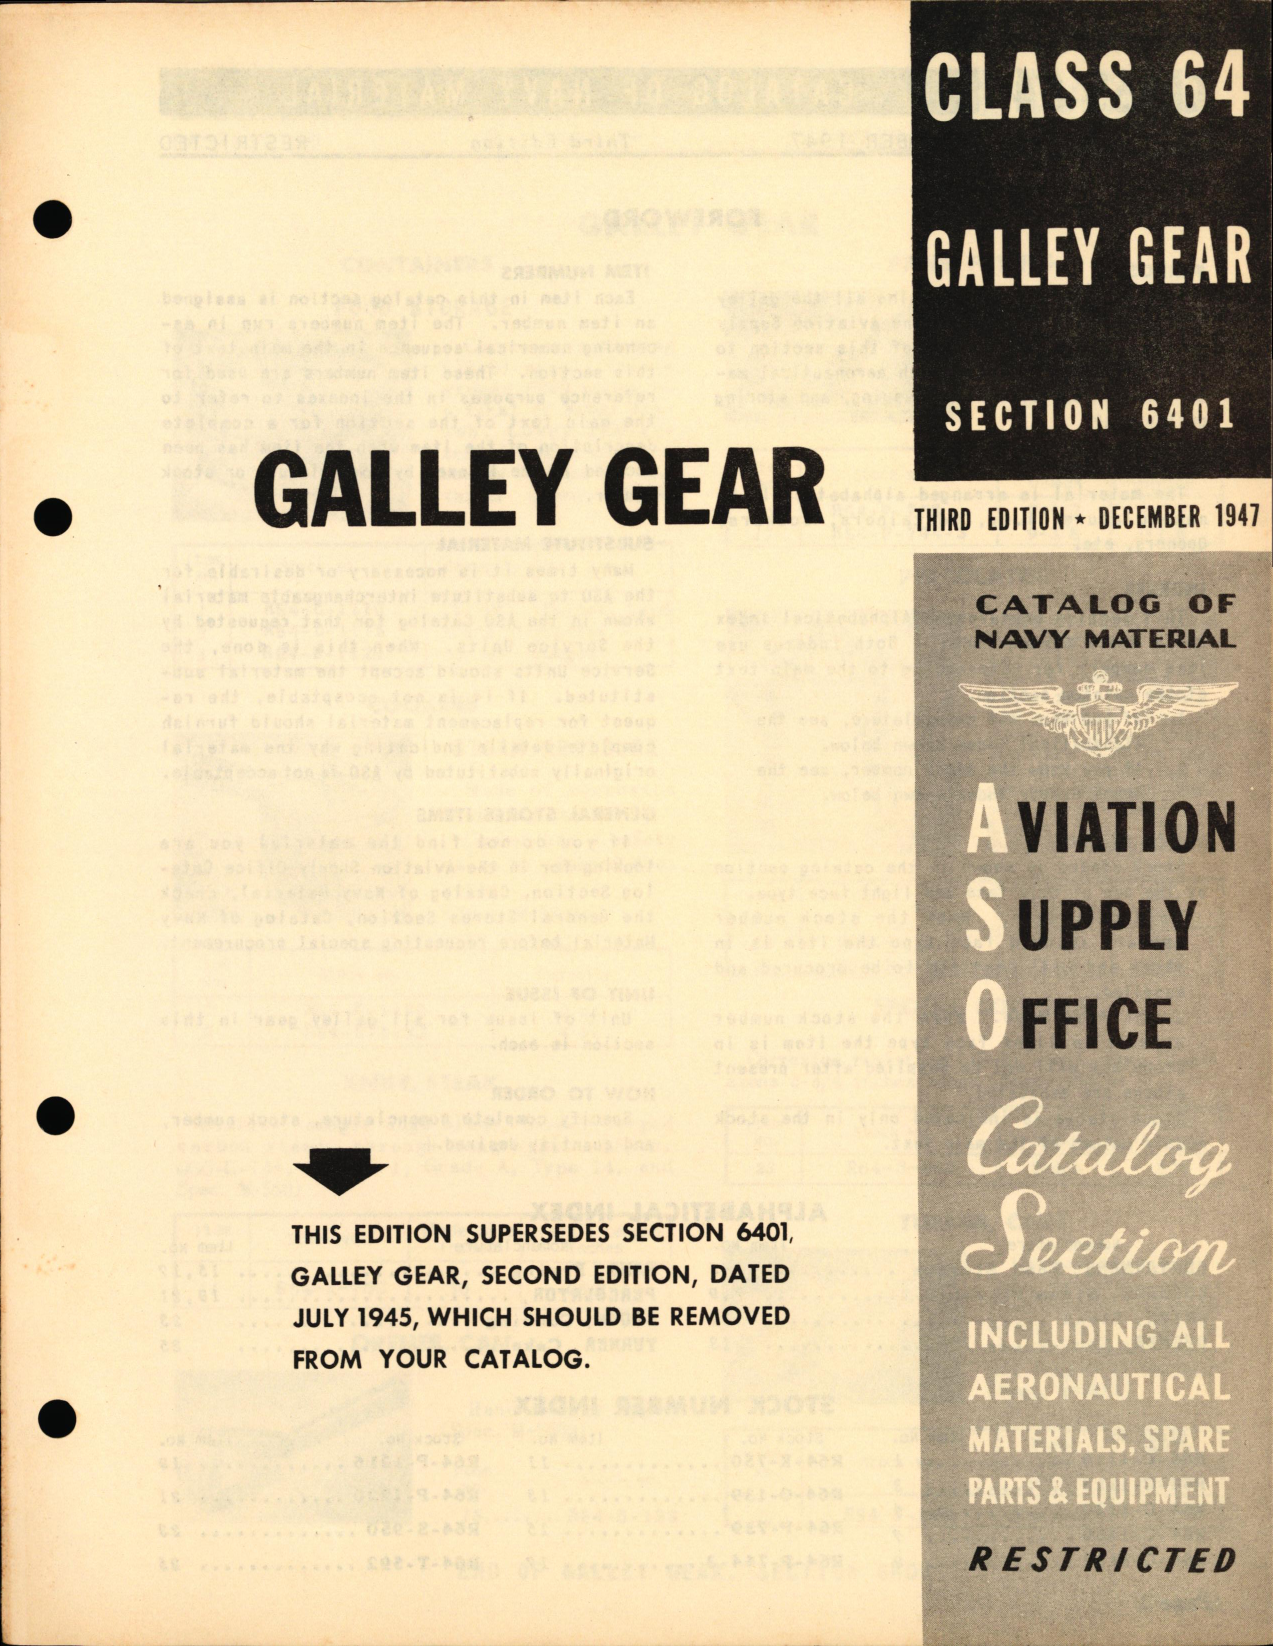 Sample page 1 from AirCorps Library document: Gallery Gear